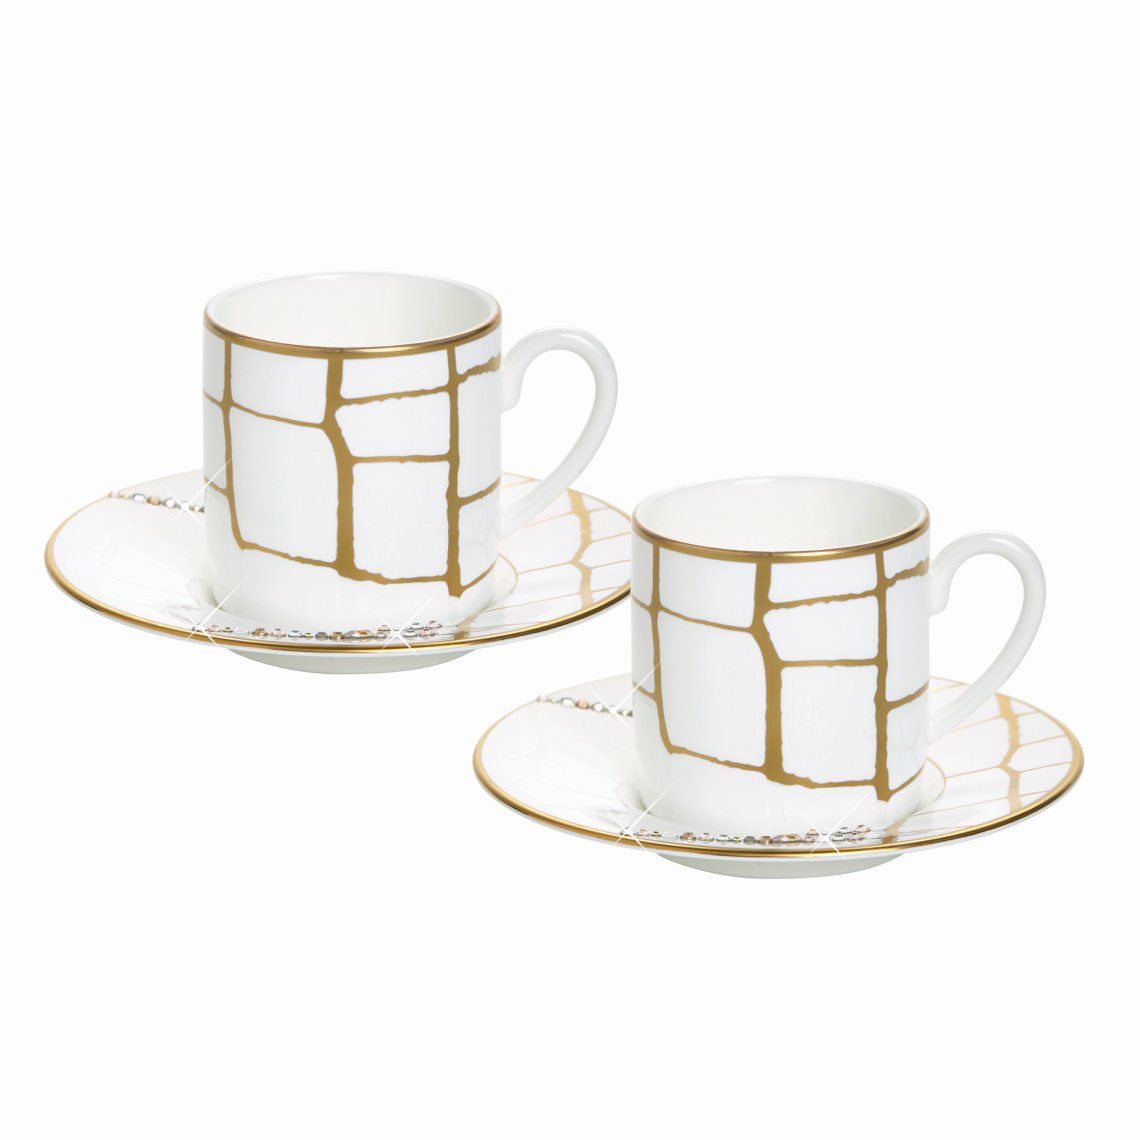 Alligator Gold Set of 2, Espresso Cups &amp; Saucers w/ Crystals White Background Photo